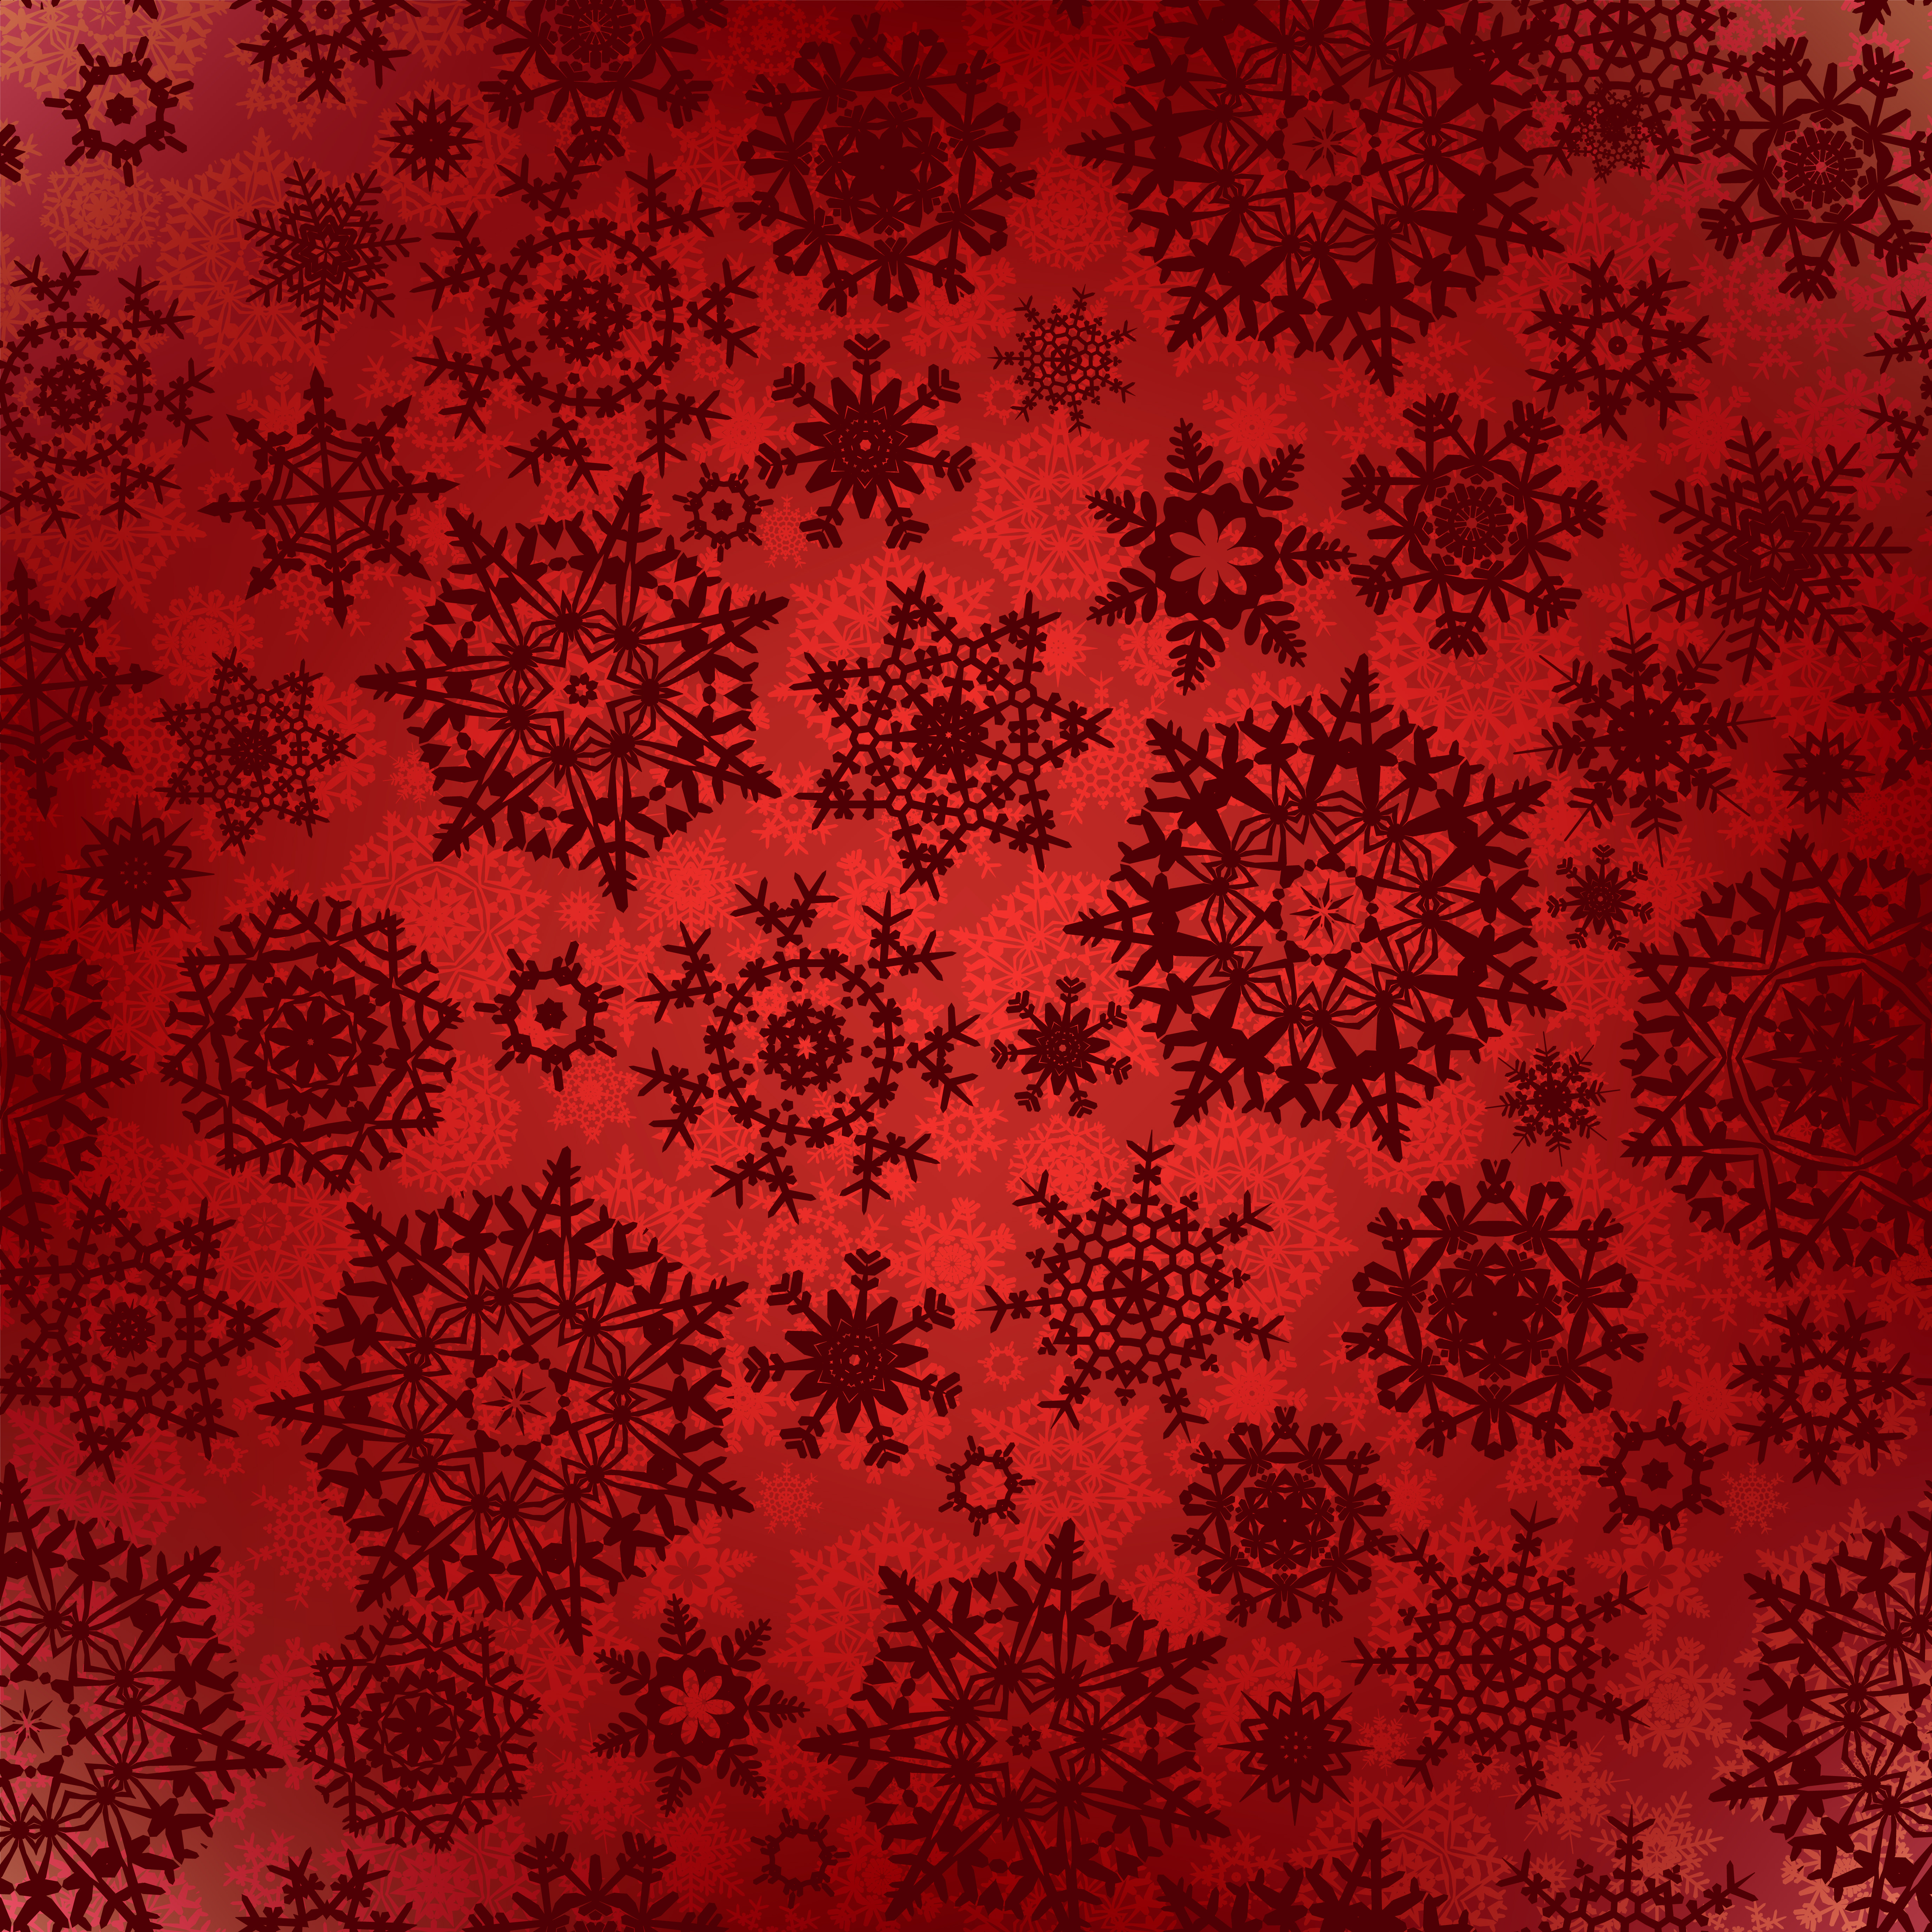 Free Photoshop Red Floral pattern